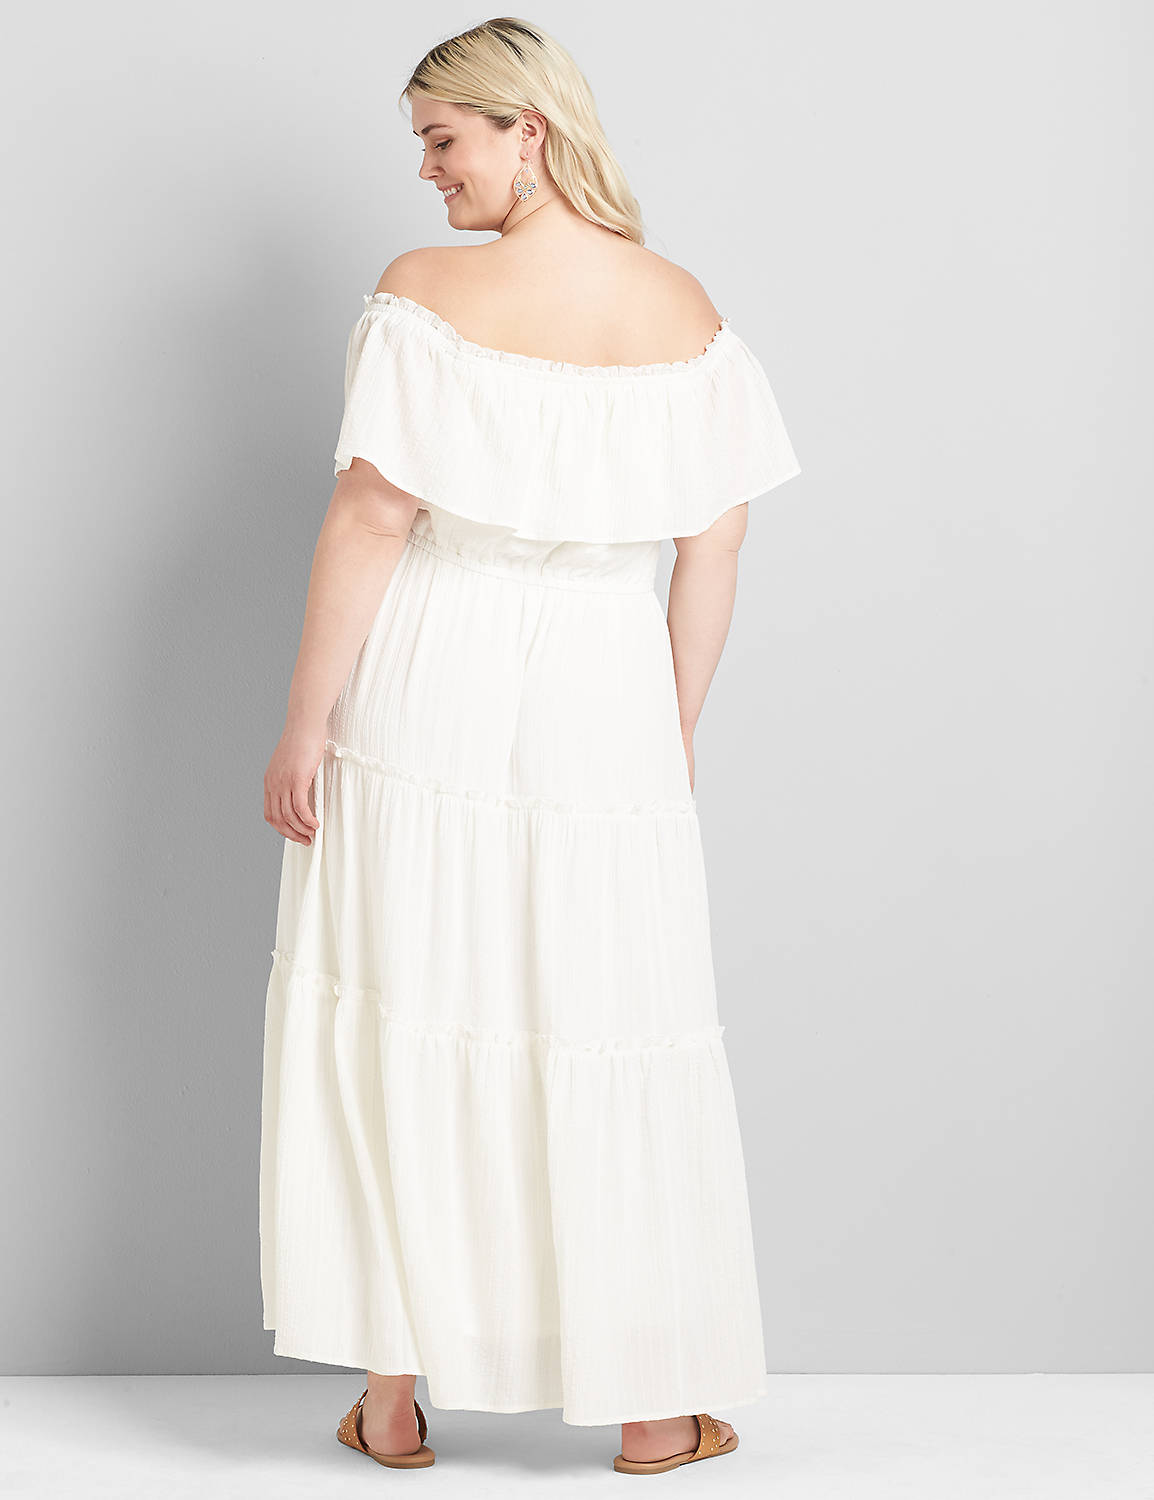 Short Sleeve Off The Shoulder Tiered Maxi 1120640:Ascena White:22/24 PETITE Product Image 2